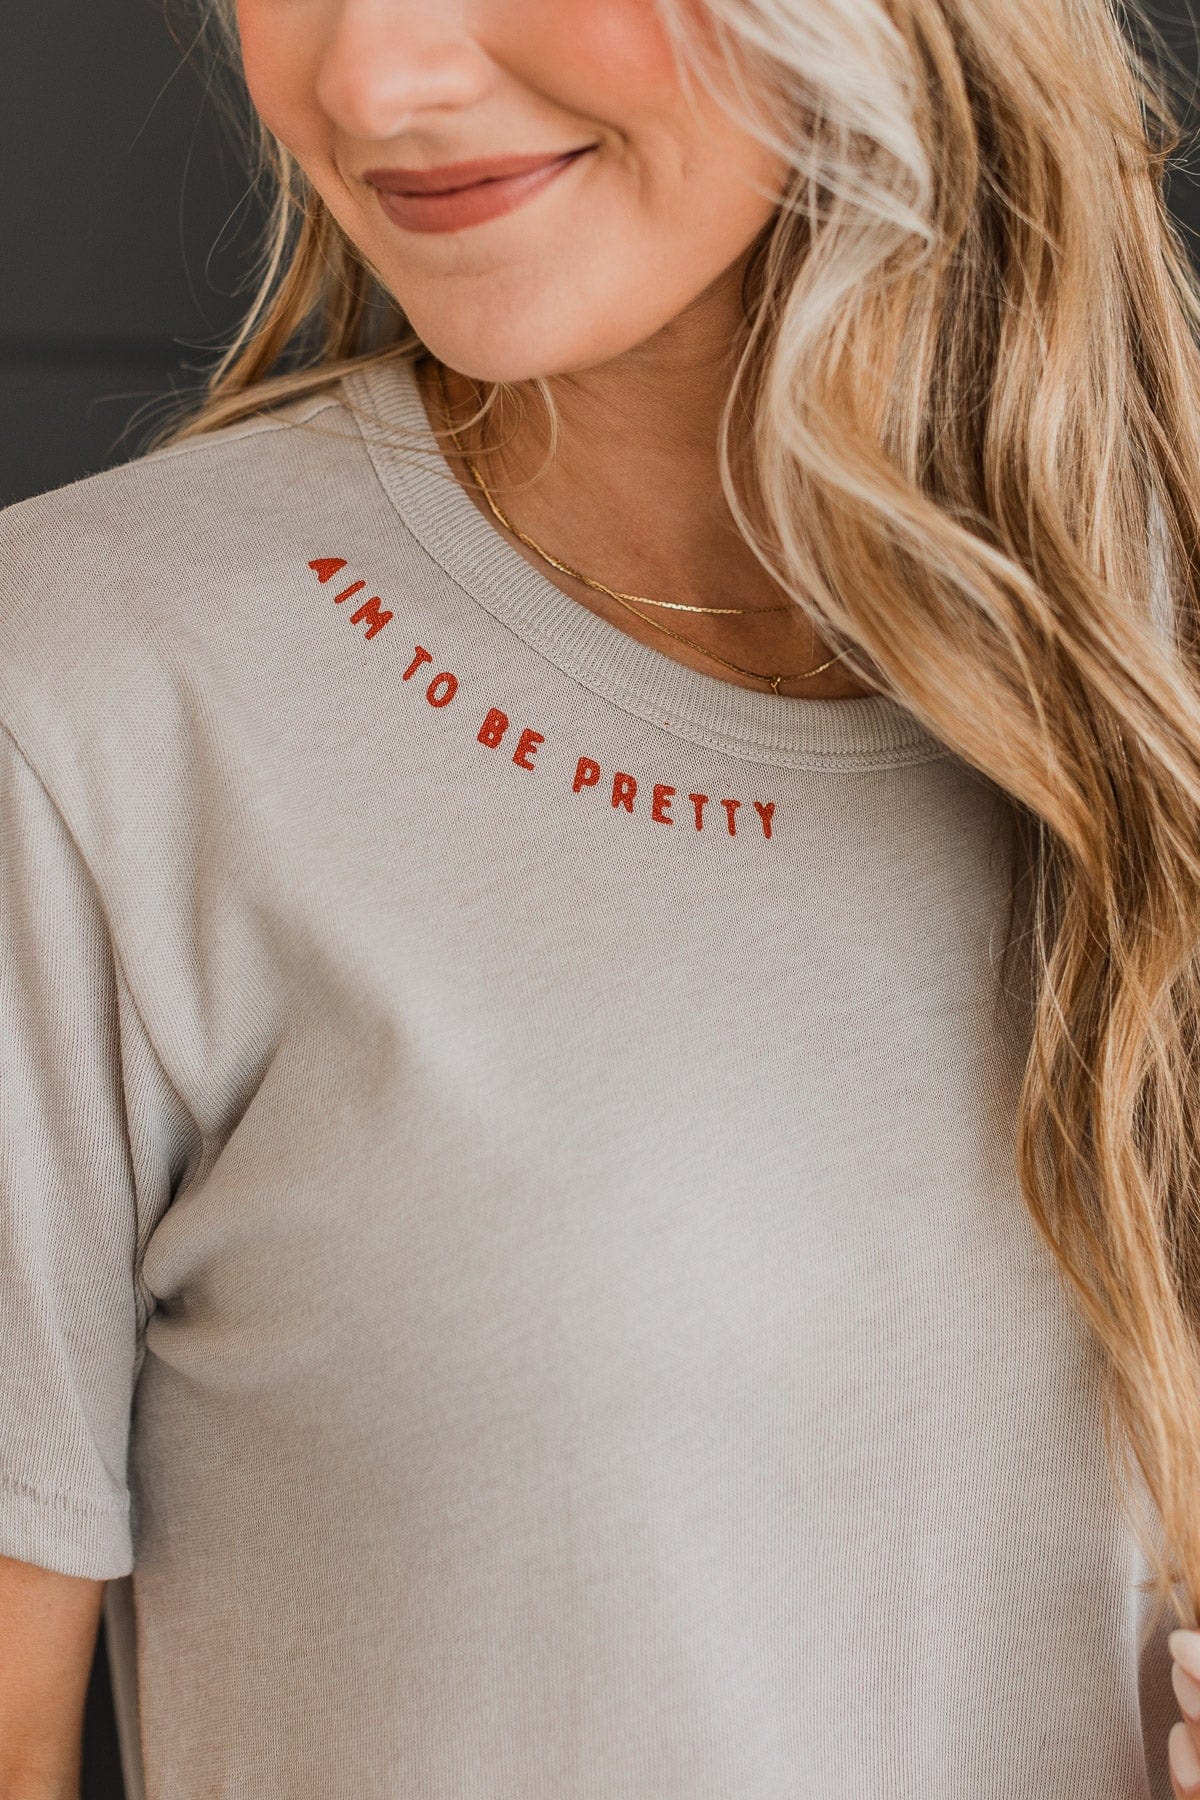 "Aim To Be Pretty" Graphic Tee- Light Taupe